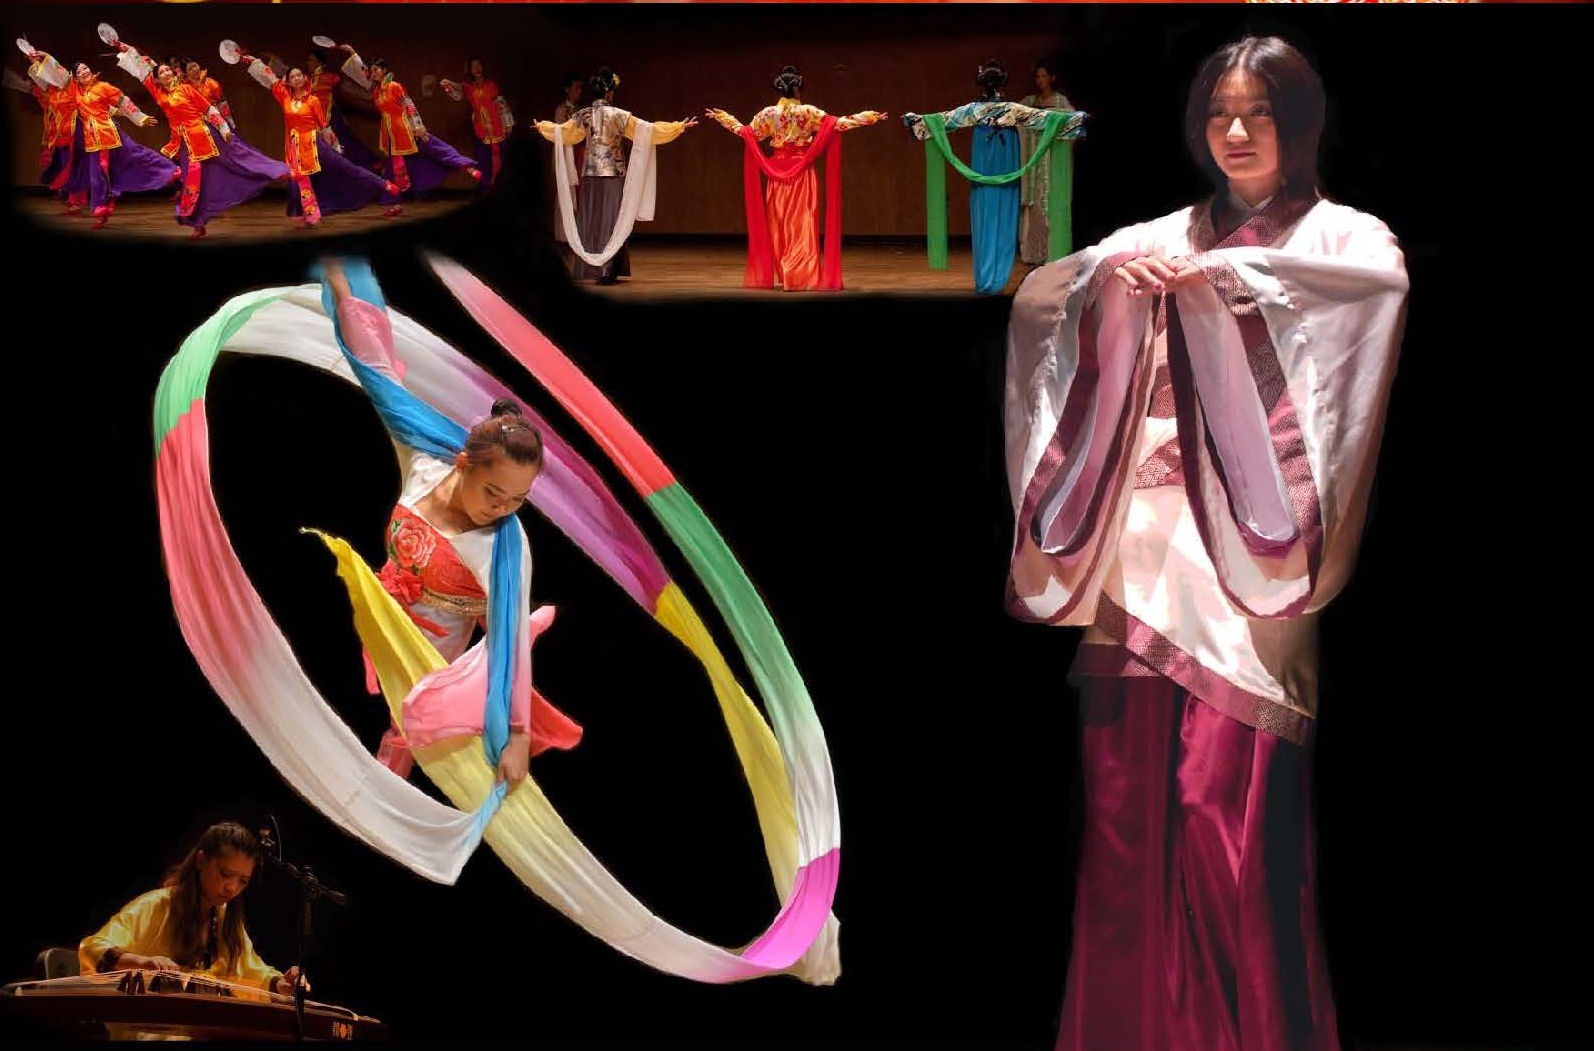 Celebrate Chinese New Year in the Bluegrass with Hanfu fashion through the dynasties set to a program of Chinese music and dance beginning 7:30 p.m. Saturday, Feb. 7, at University of Kentucky Singletary Center for the Arts Recital Hall. This event is free and open to the public.